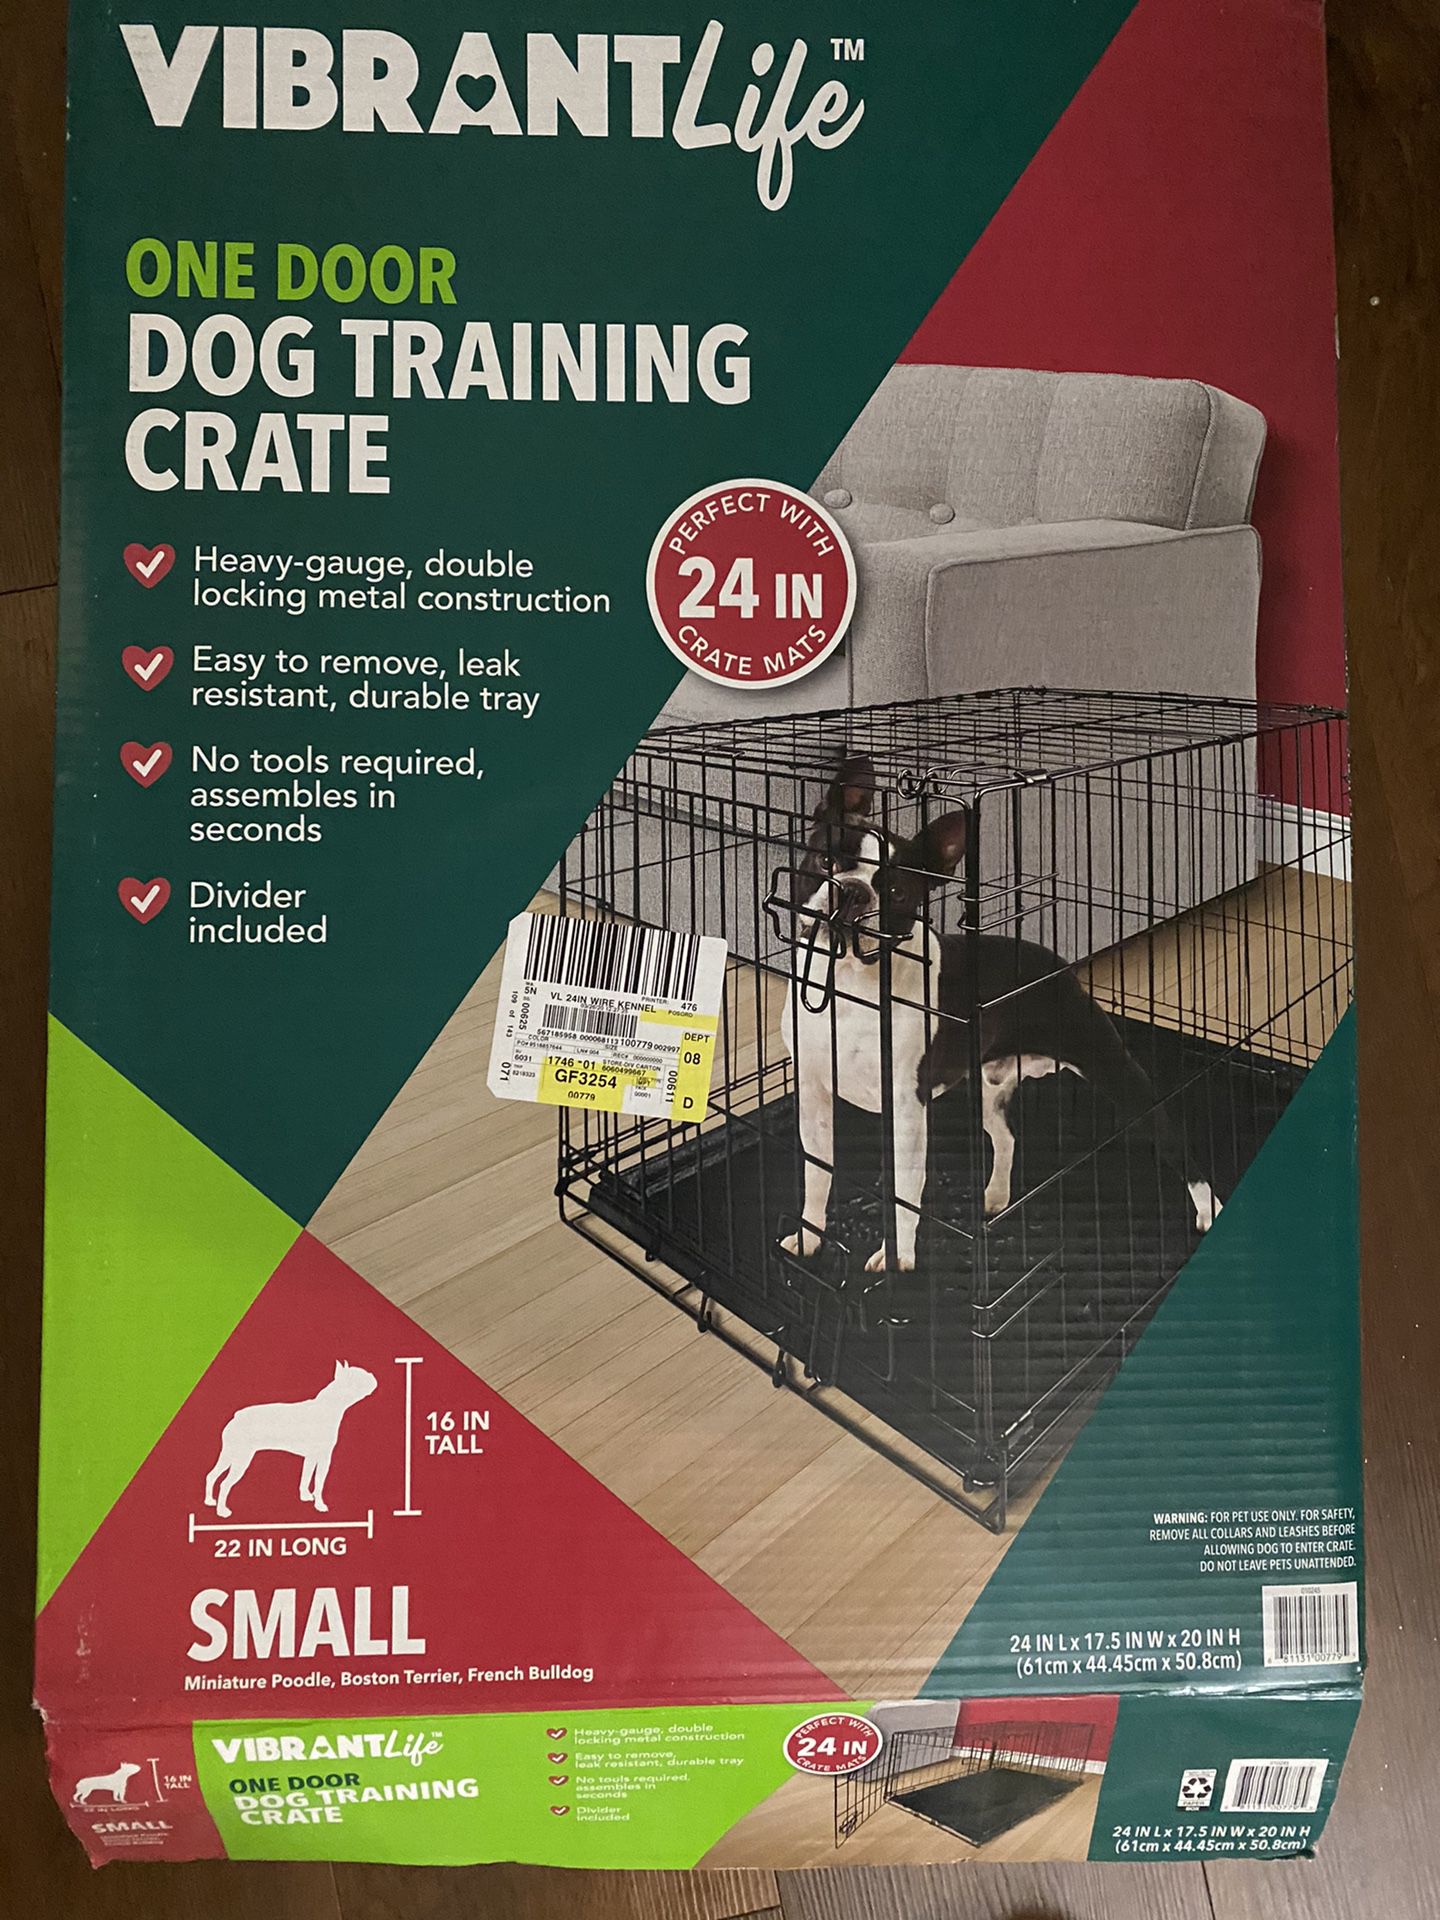 Dog Training Crate - One Door Small